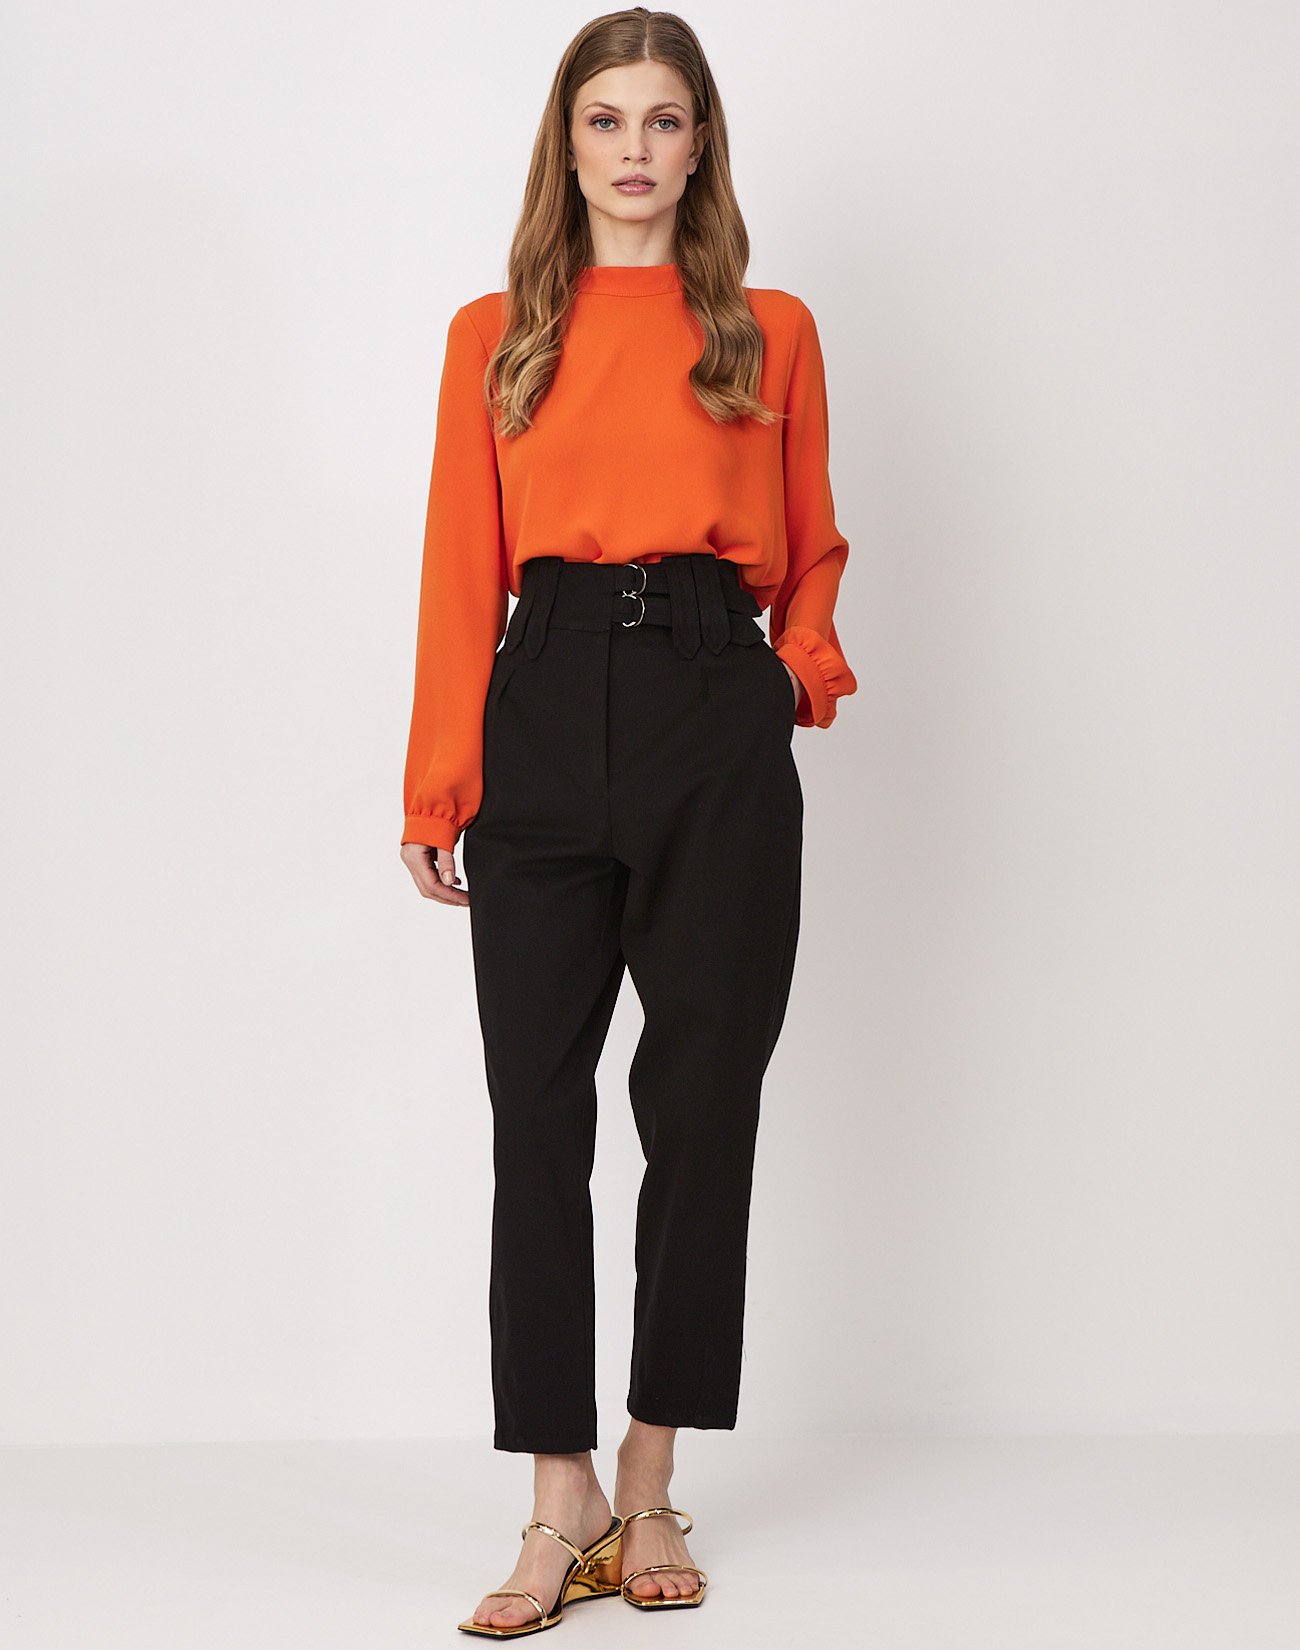 High waist trousers with metal buckles